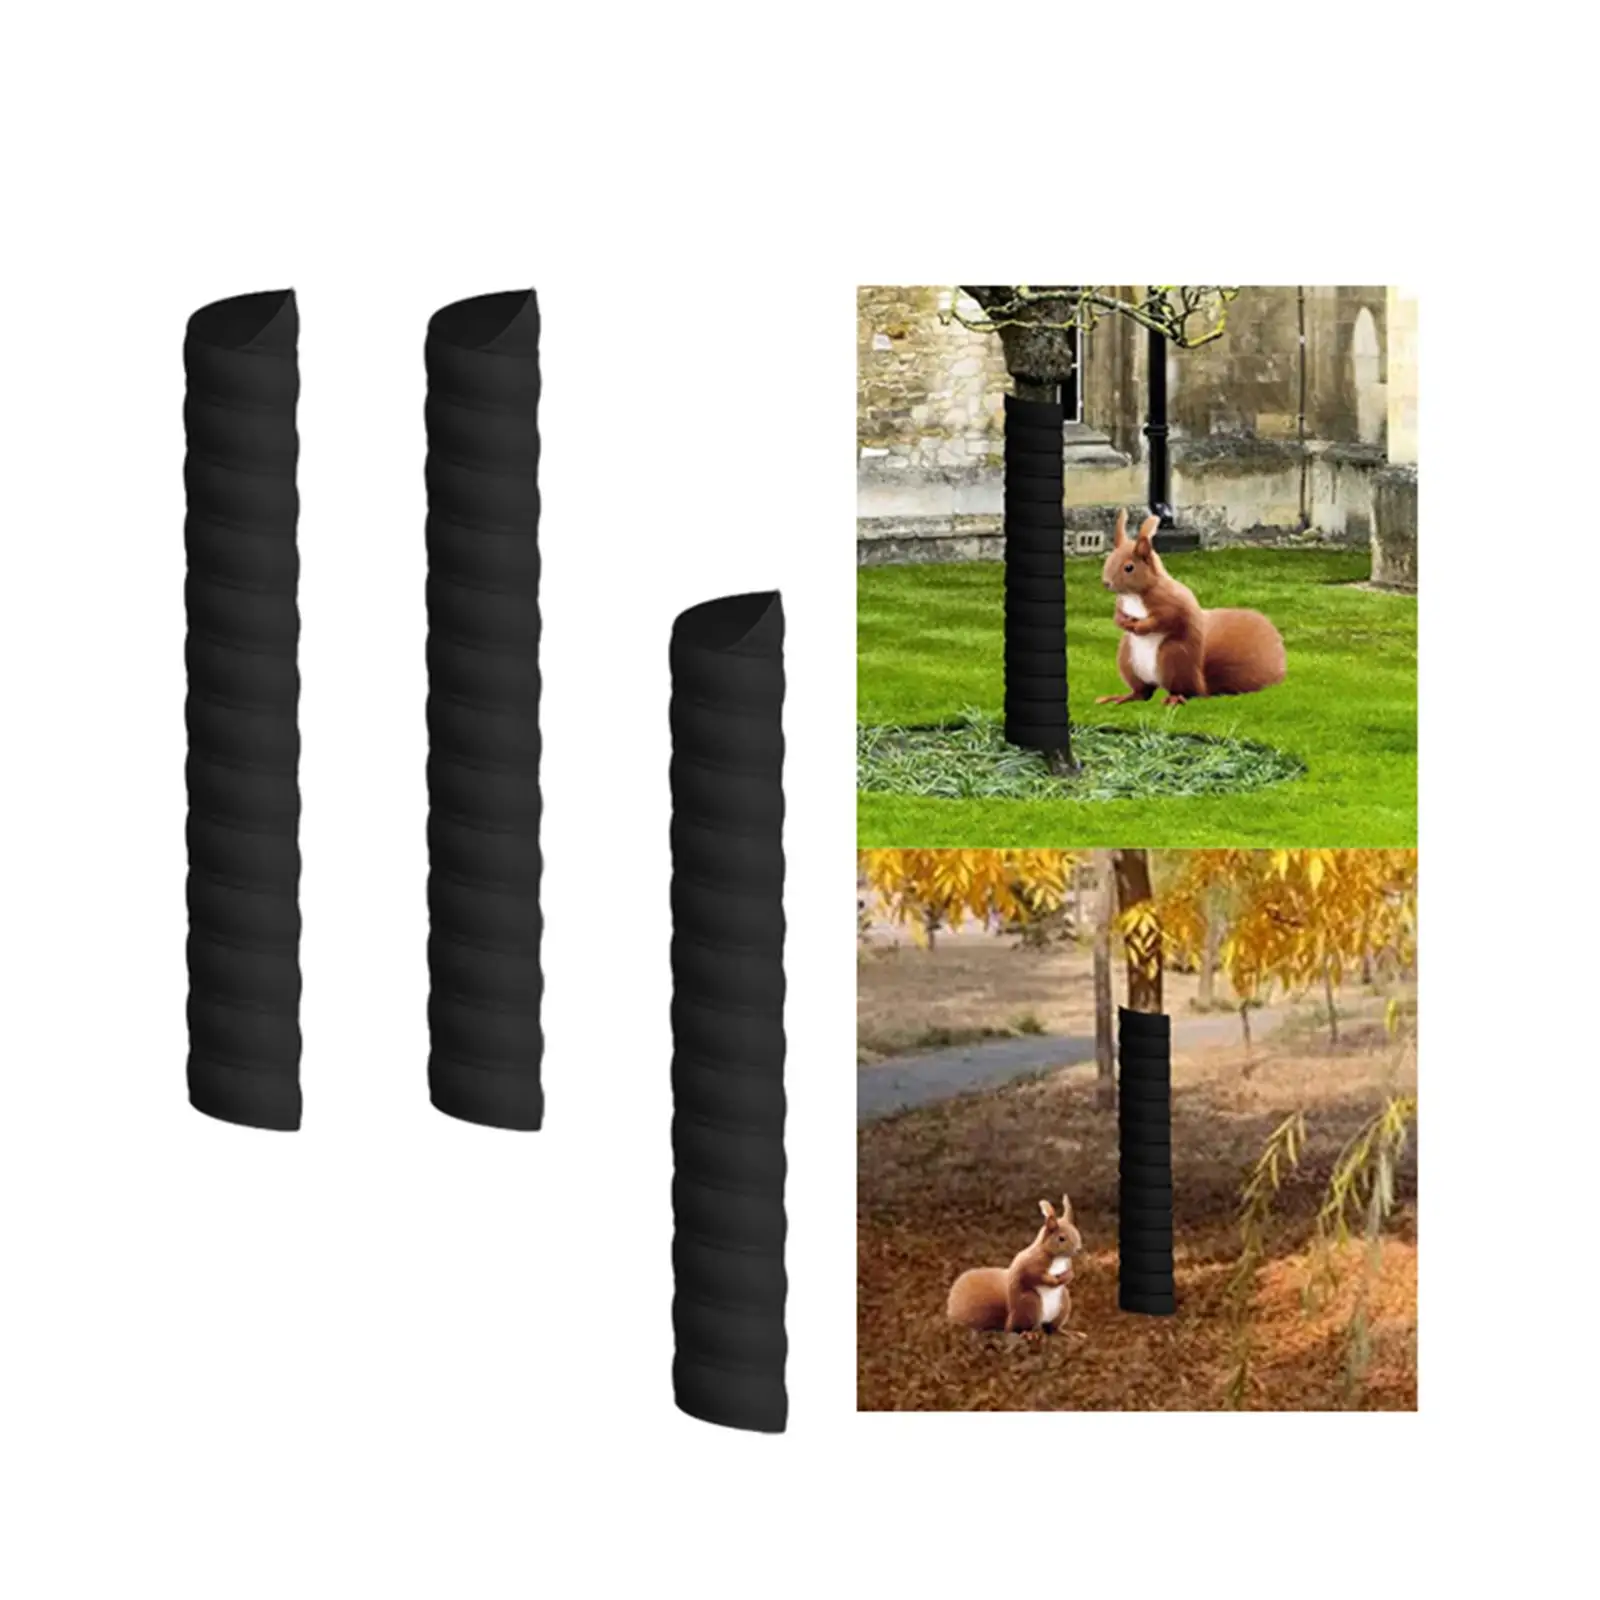 2 Pieces Tree Trunk Protectors Protect Saplings Plants Anti Chewing Scratch Resistant Tree Protection Durable Spiral Tree Guards